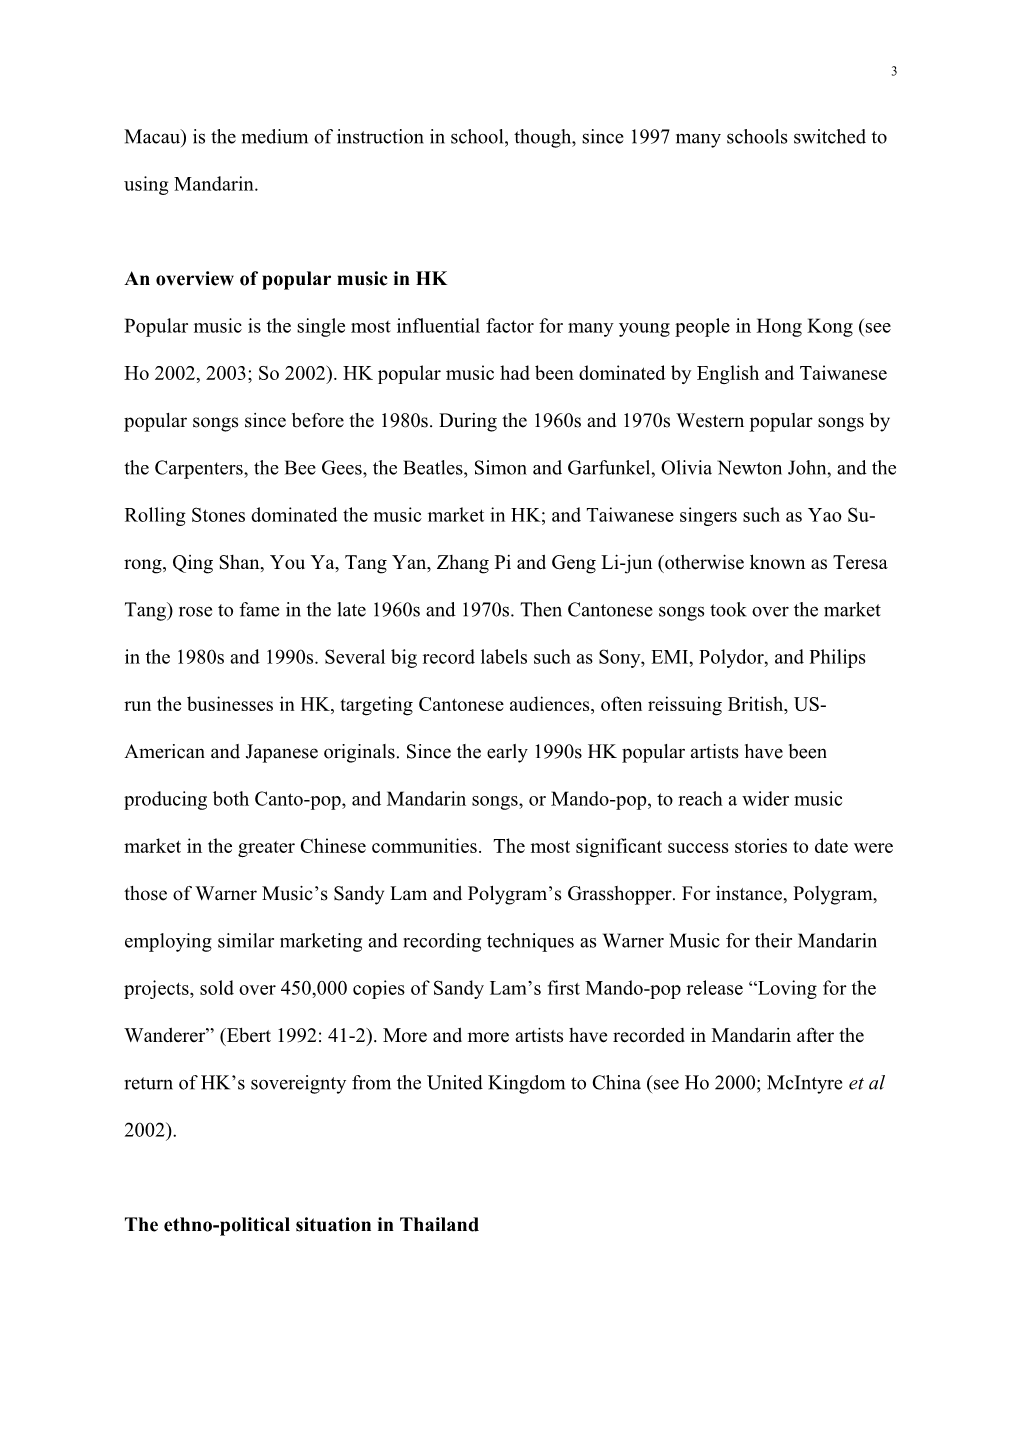 A Comparative Study of Adolescent Preferences for Popular Music in Hong Kong and Thailand